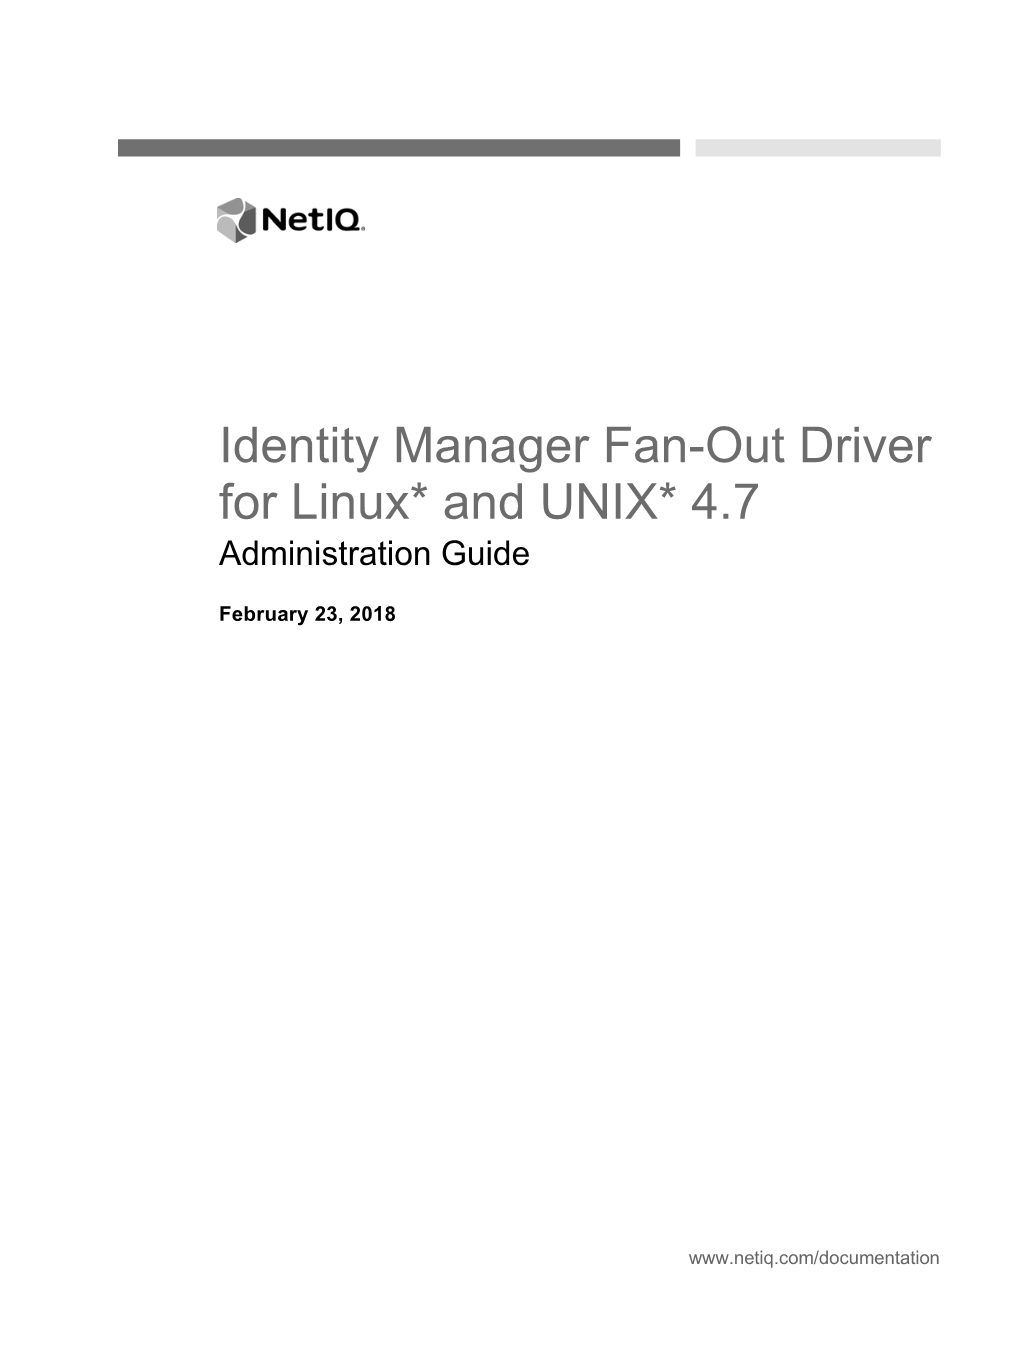 Identity Manager Fan-Out Driver for Linux* and UNIX* 4.7 Administration Guide